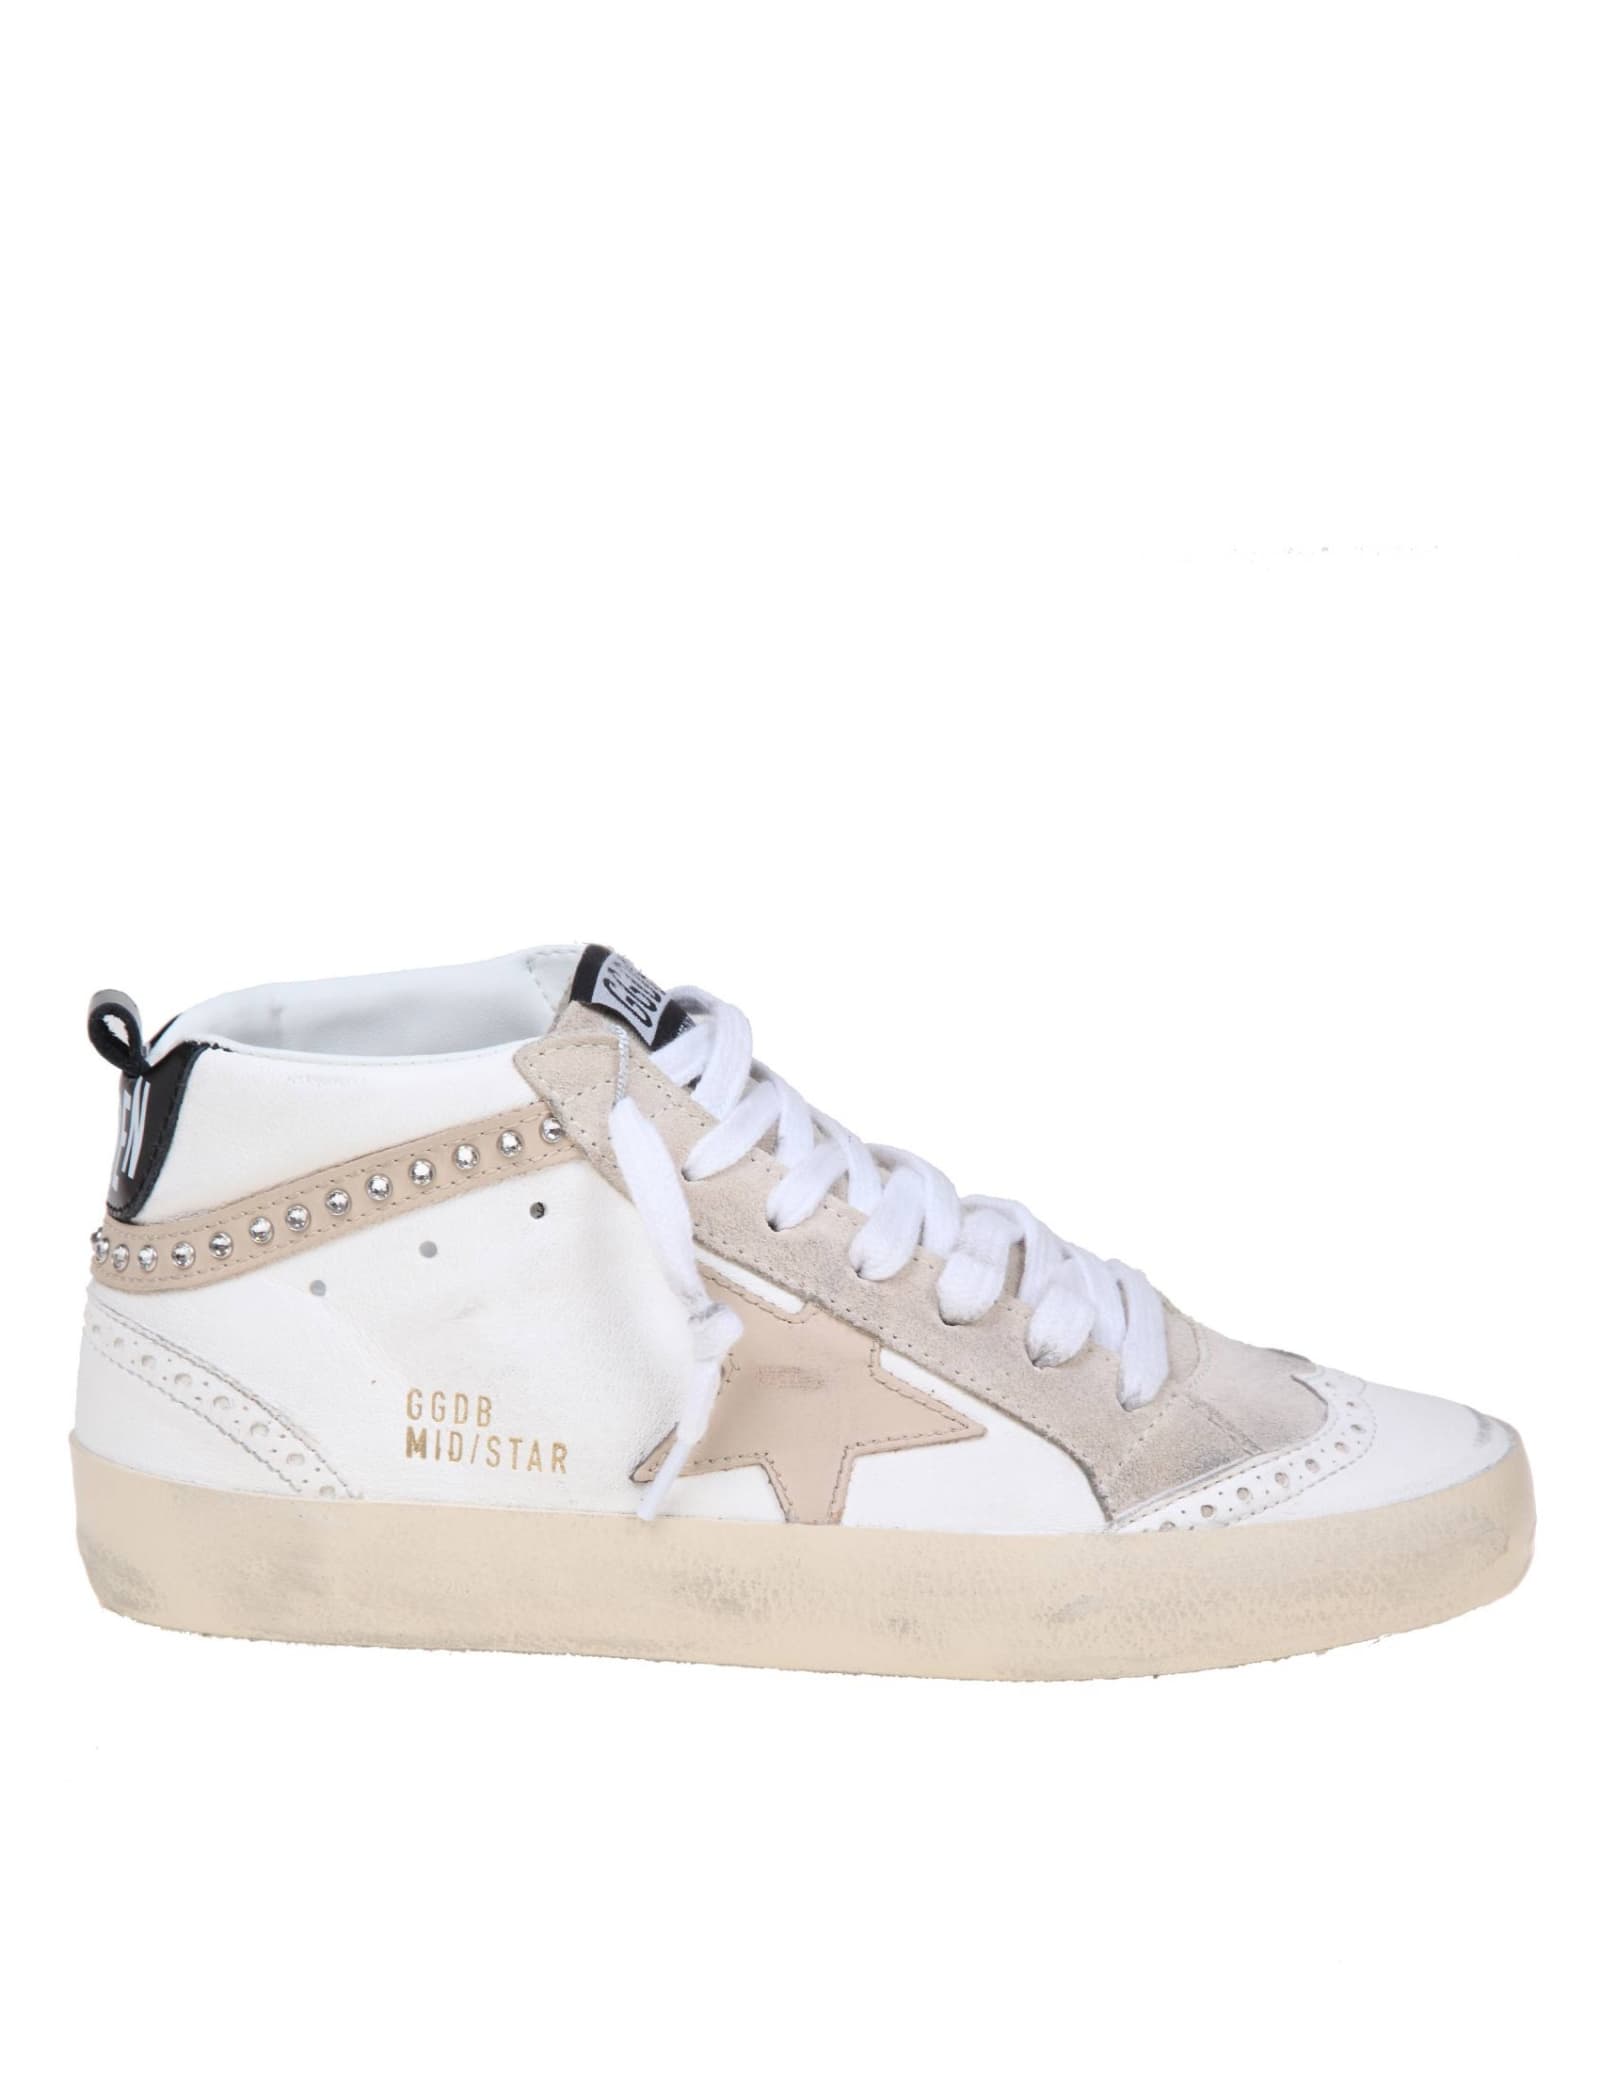 GOLDEN GOOSE GOLDEN GOOSE MID STAR SNEAKERS IN WHITE LEATHER WITH APPLIED CRYSTALS